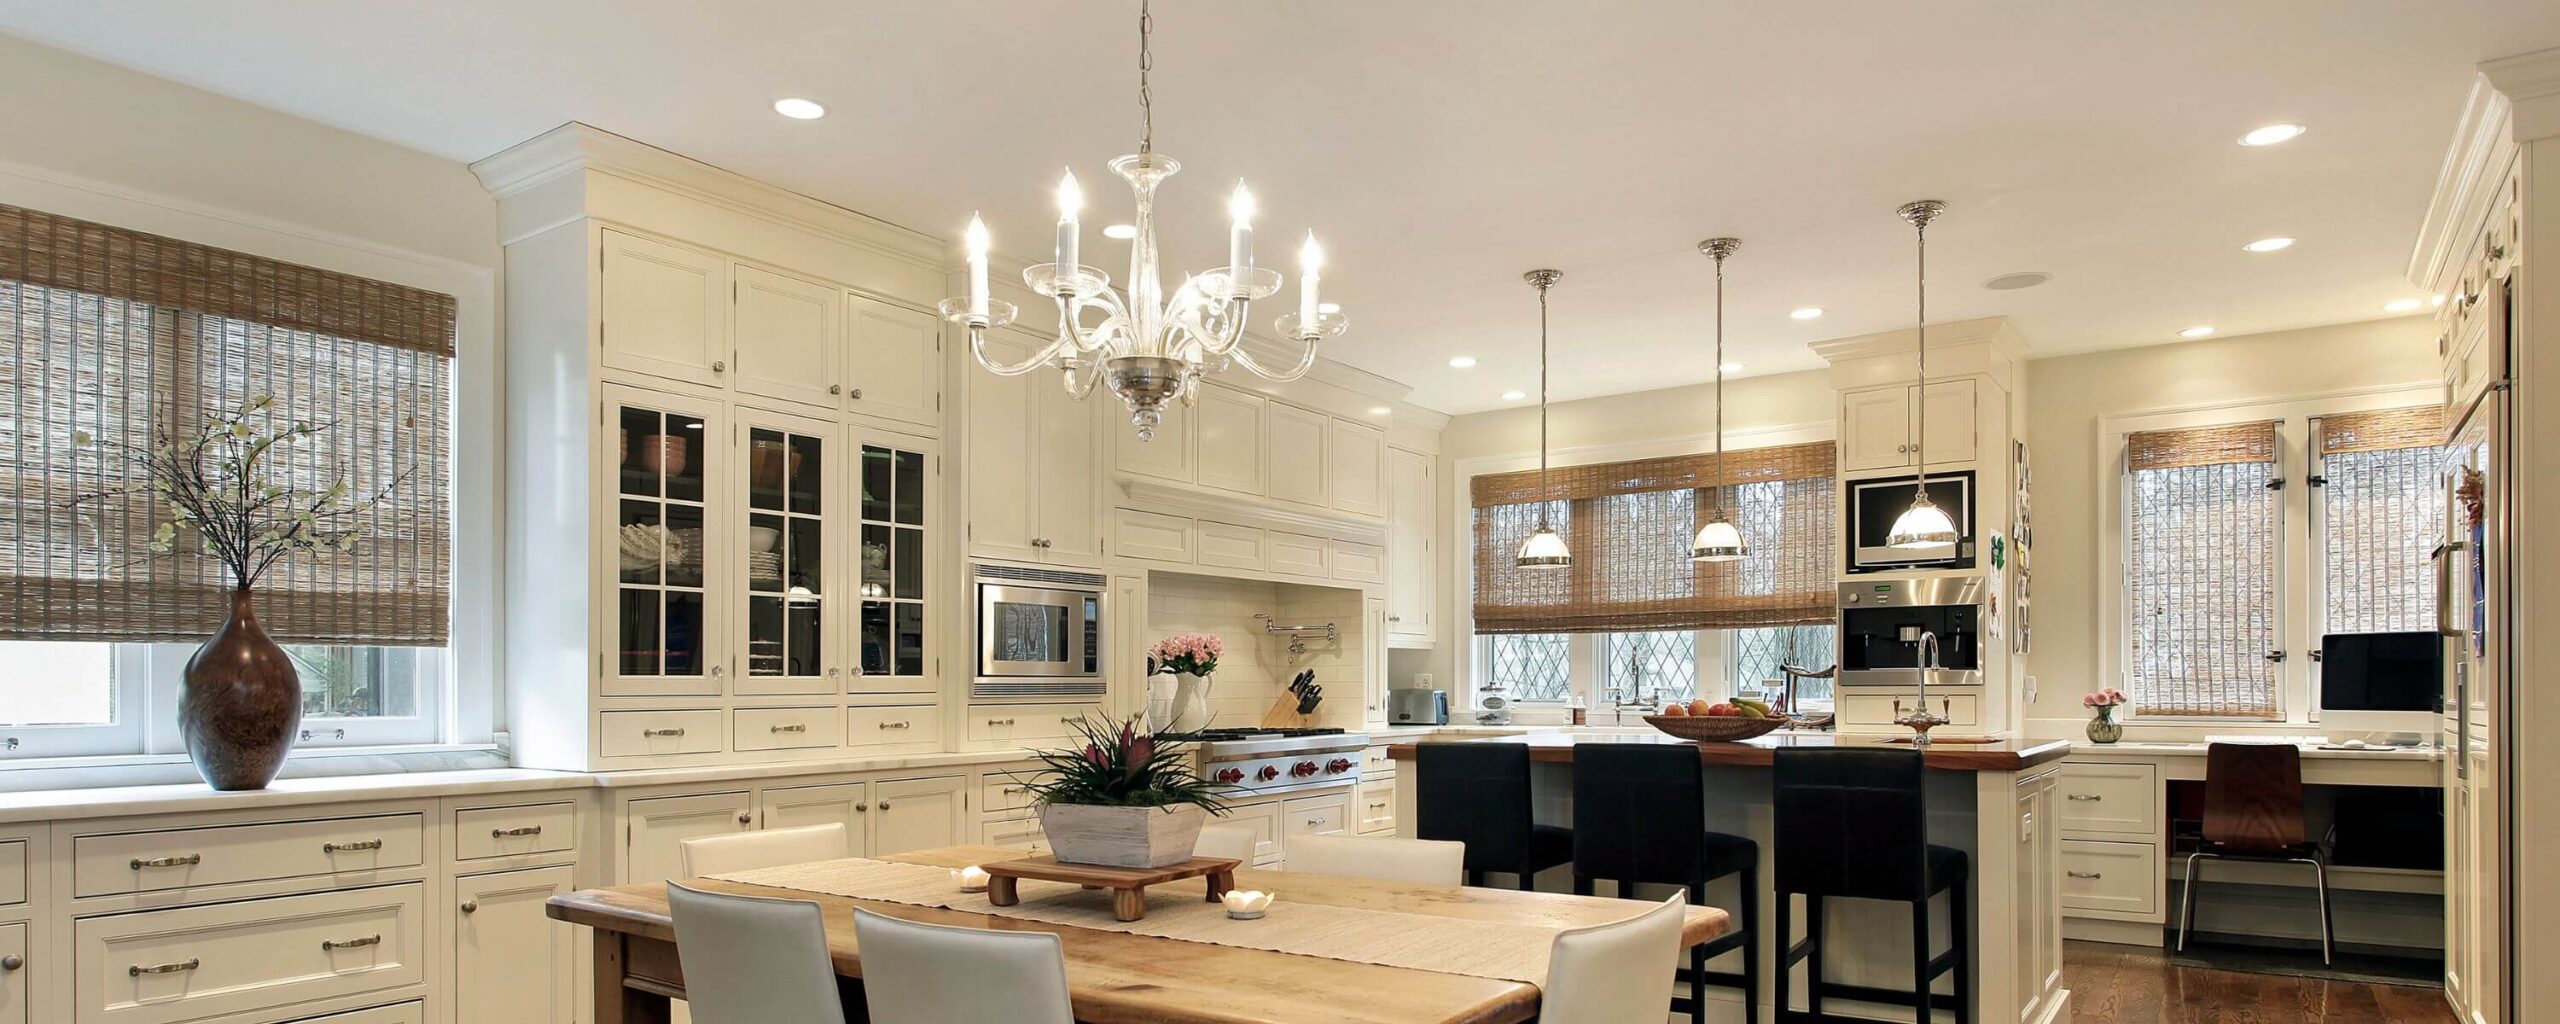 A beautiful white kitchen with marble countertops